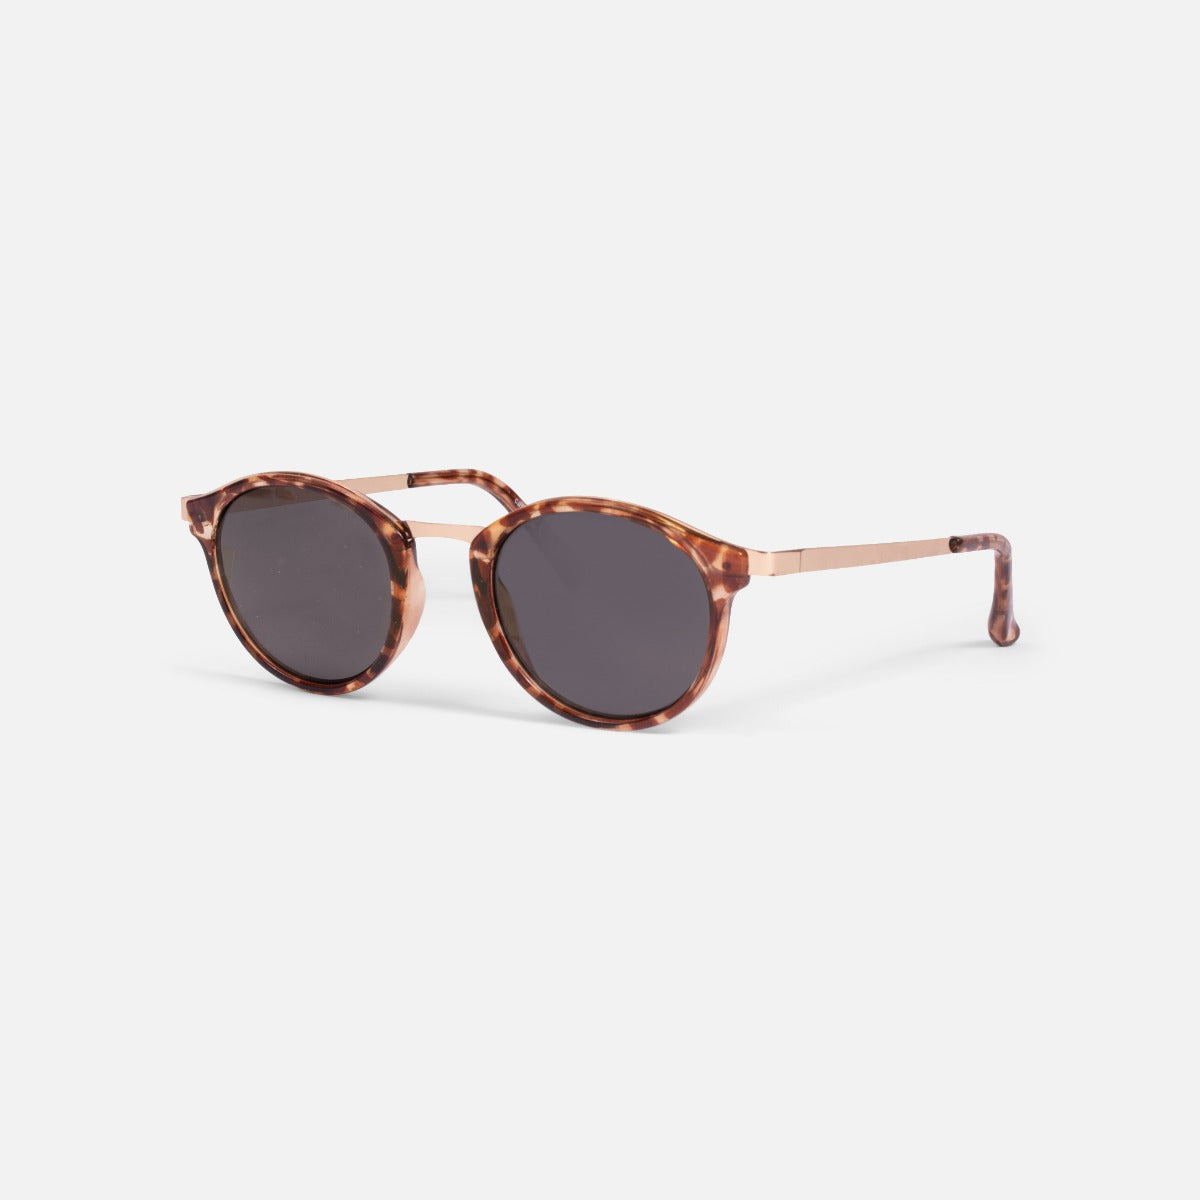 Sunglasses with metallic rose gold branches and tortoise lens outline